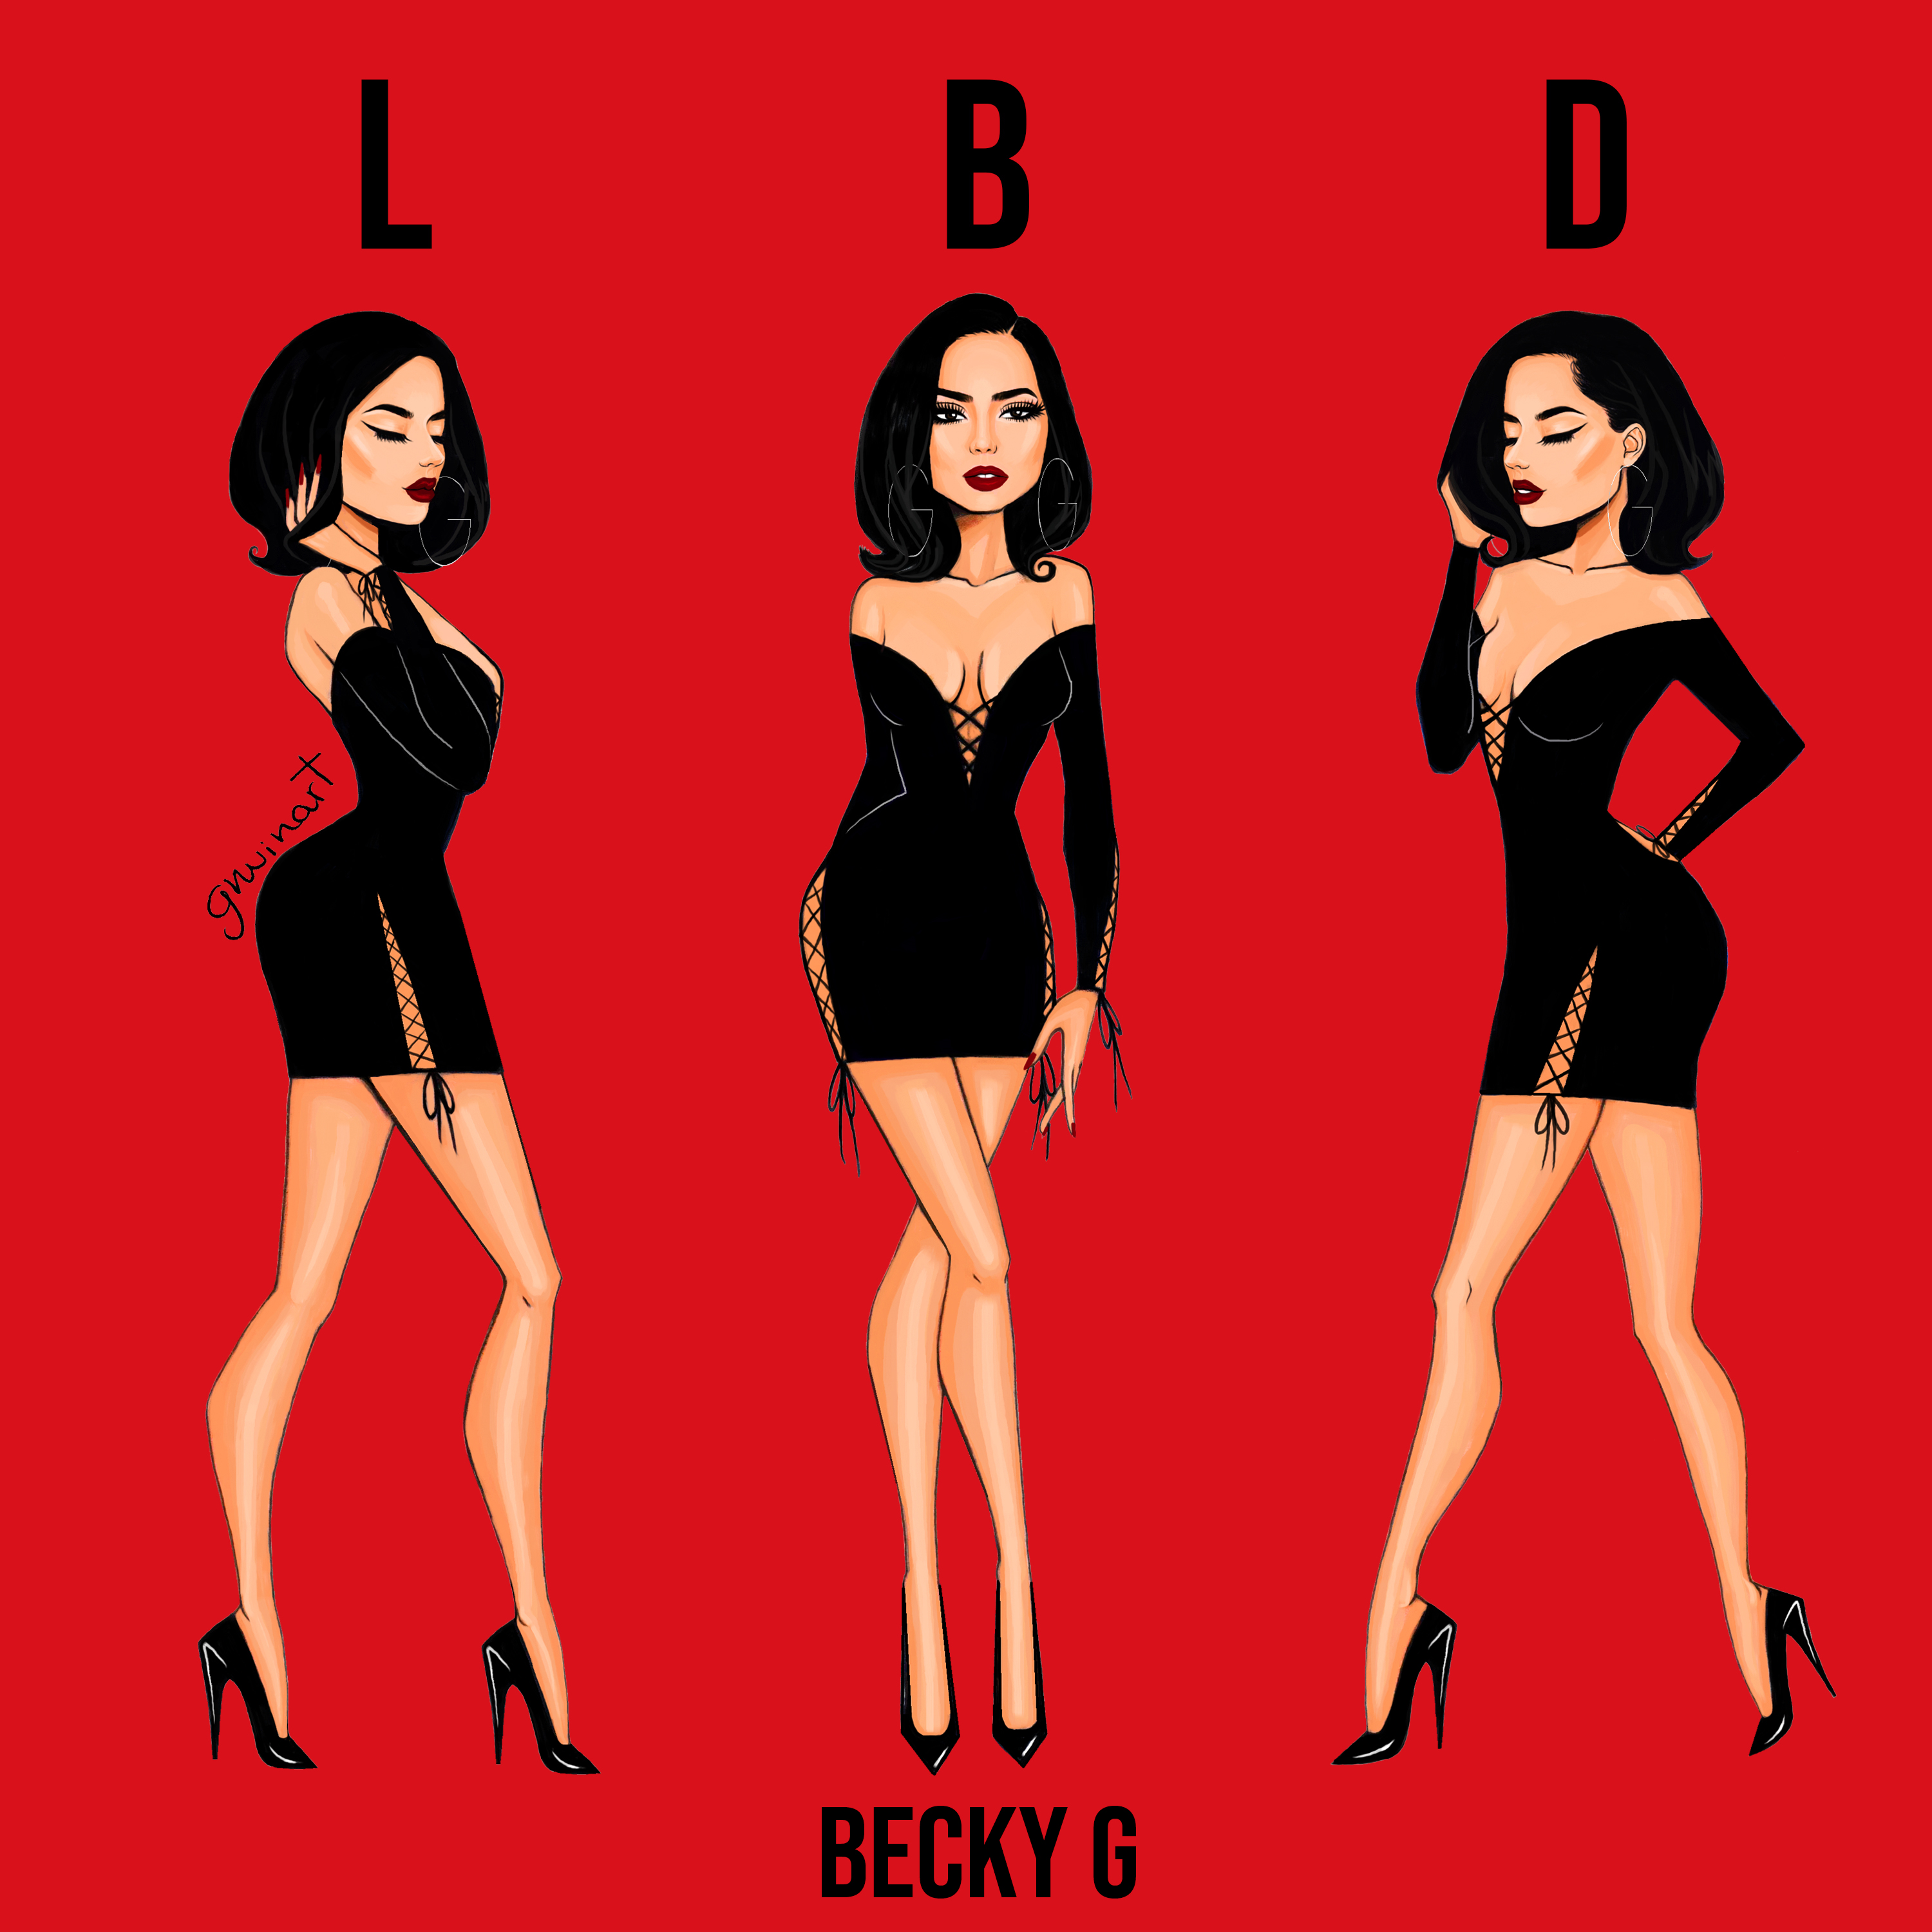 Becky G Releases New Single Lbd Along With Lyric Video Today Rca Records